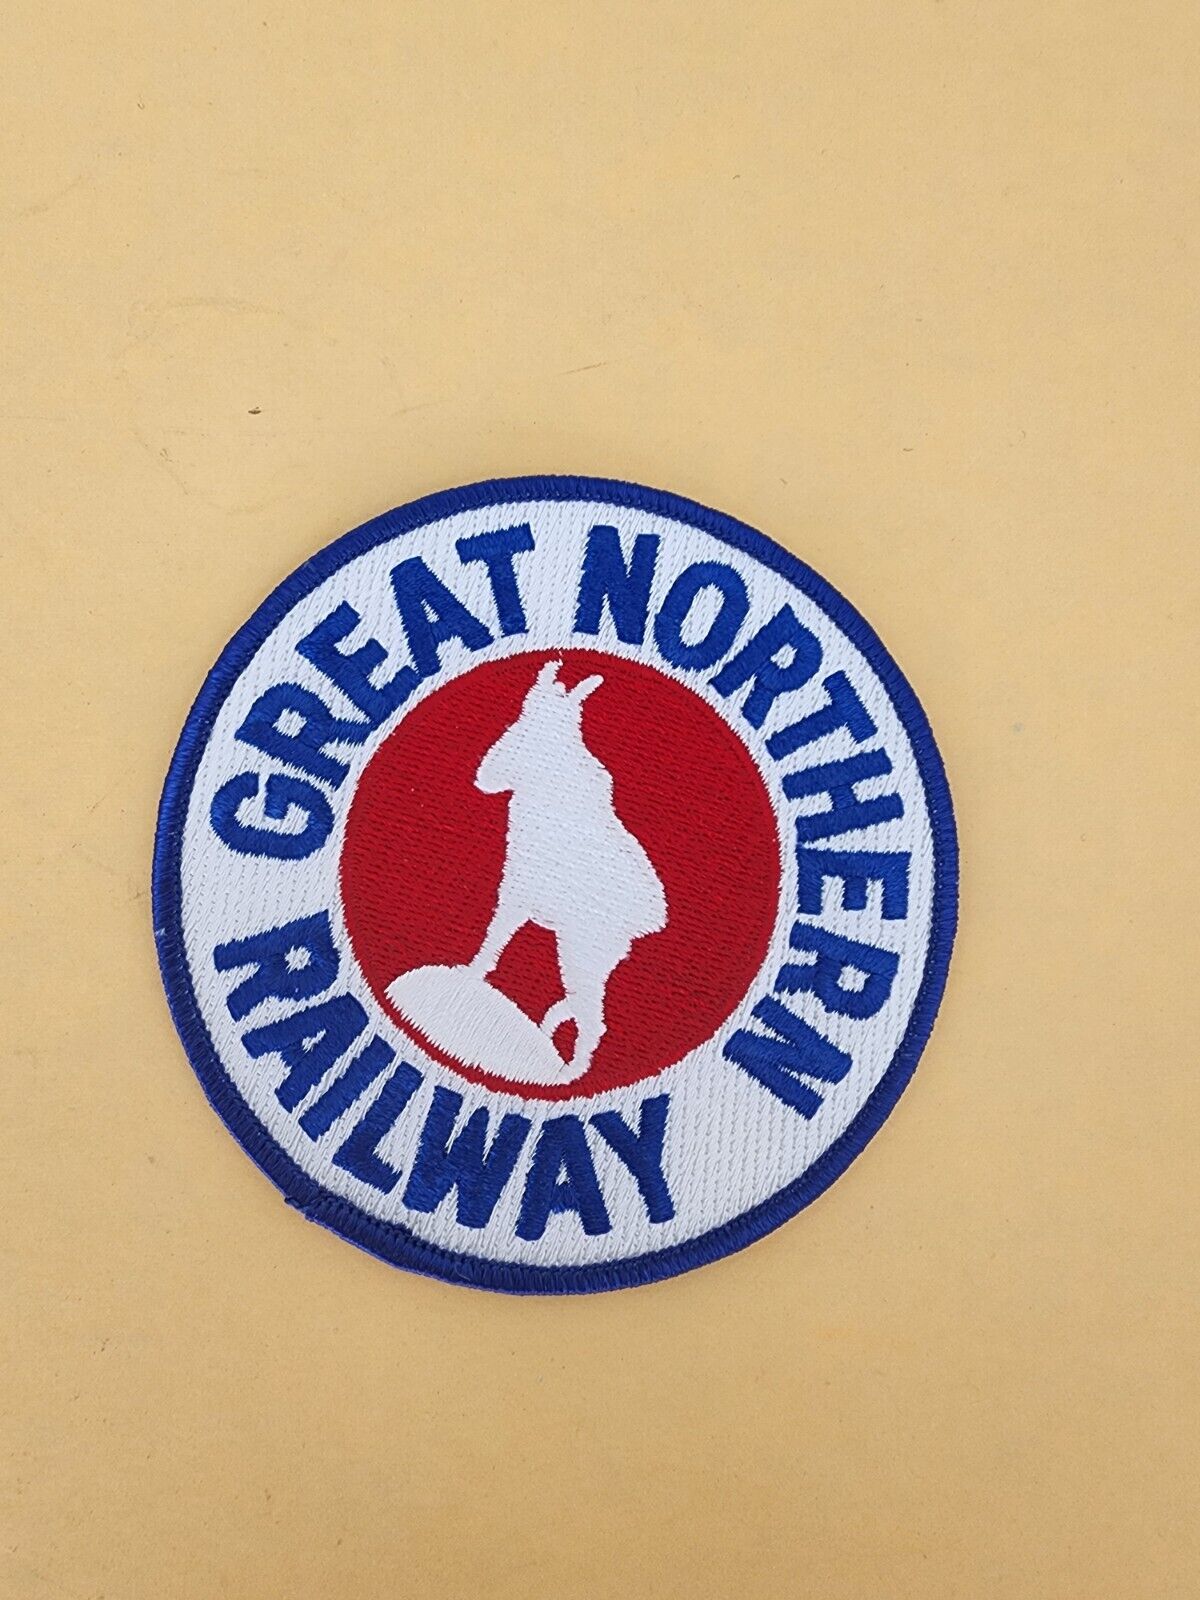 GREAT NORTHERN RAILWAY RAILROAD Patch (Railroad / Train Related